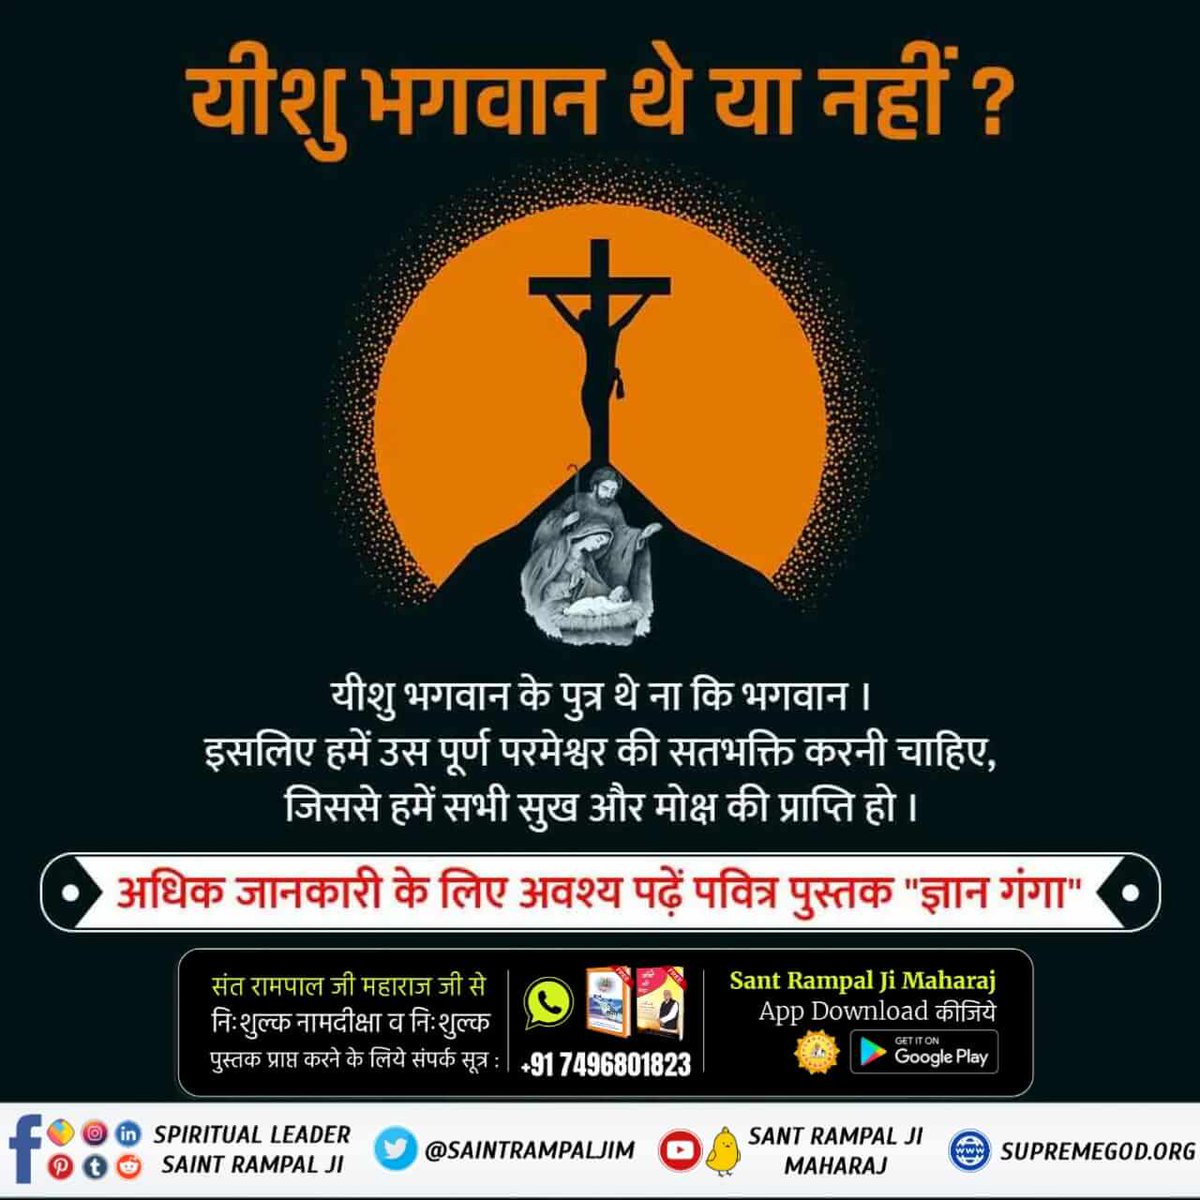 #ईसाईधर्म_का_यथार्थज्ञान One quality of a true God is that he neither takes birth nor does he die, i.e., He is eternal. But Christ did not fulfill both of these conditions. He took birth from Mary and died at the cross of the Calvary. So, he is not the Lord. Facts About Jesus